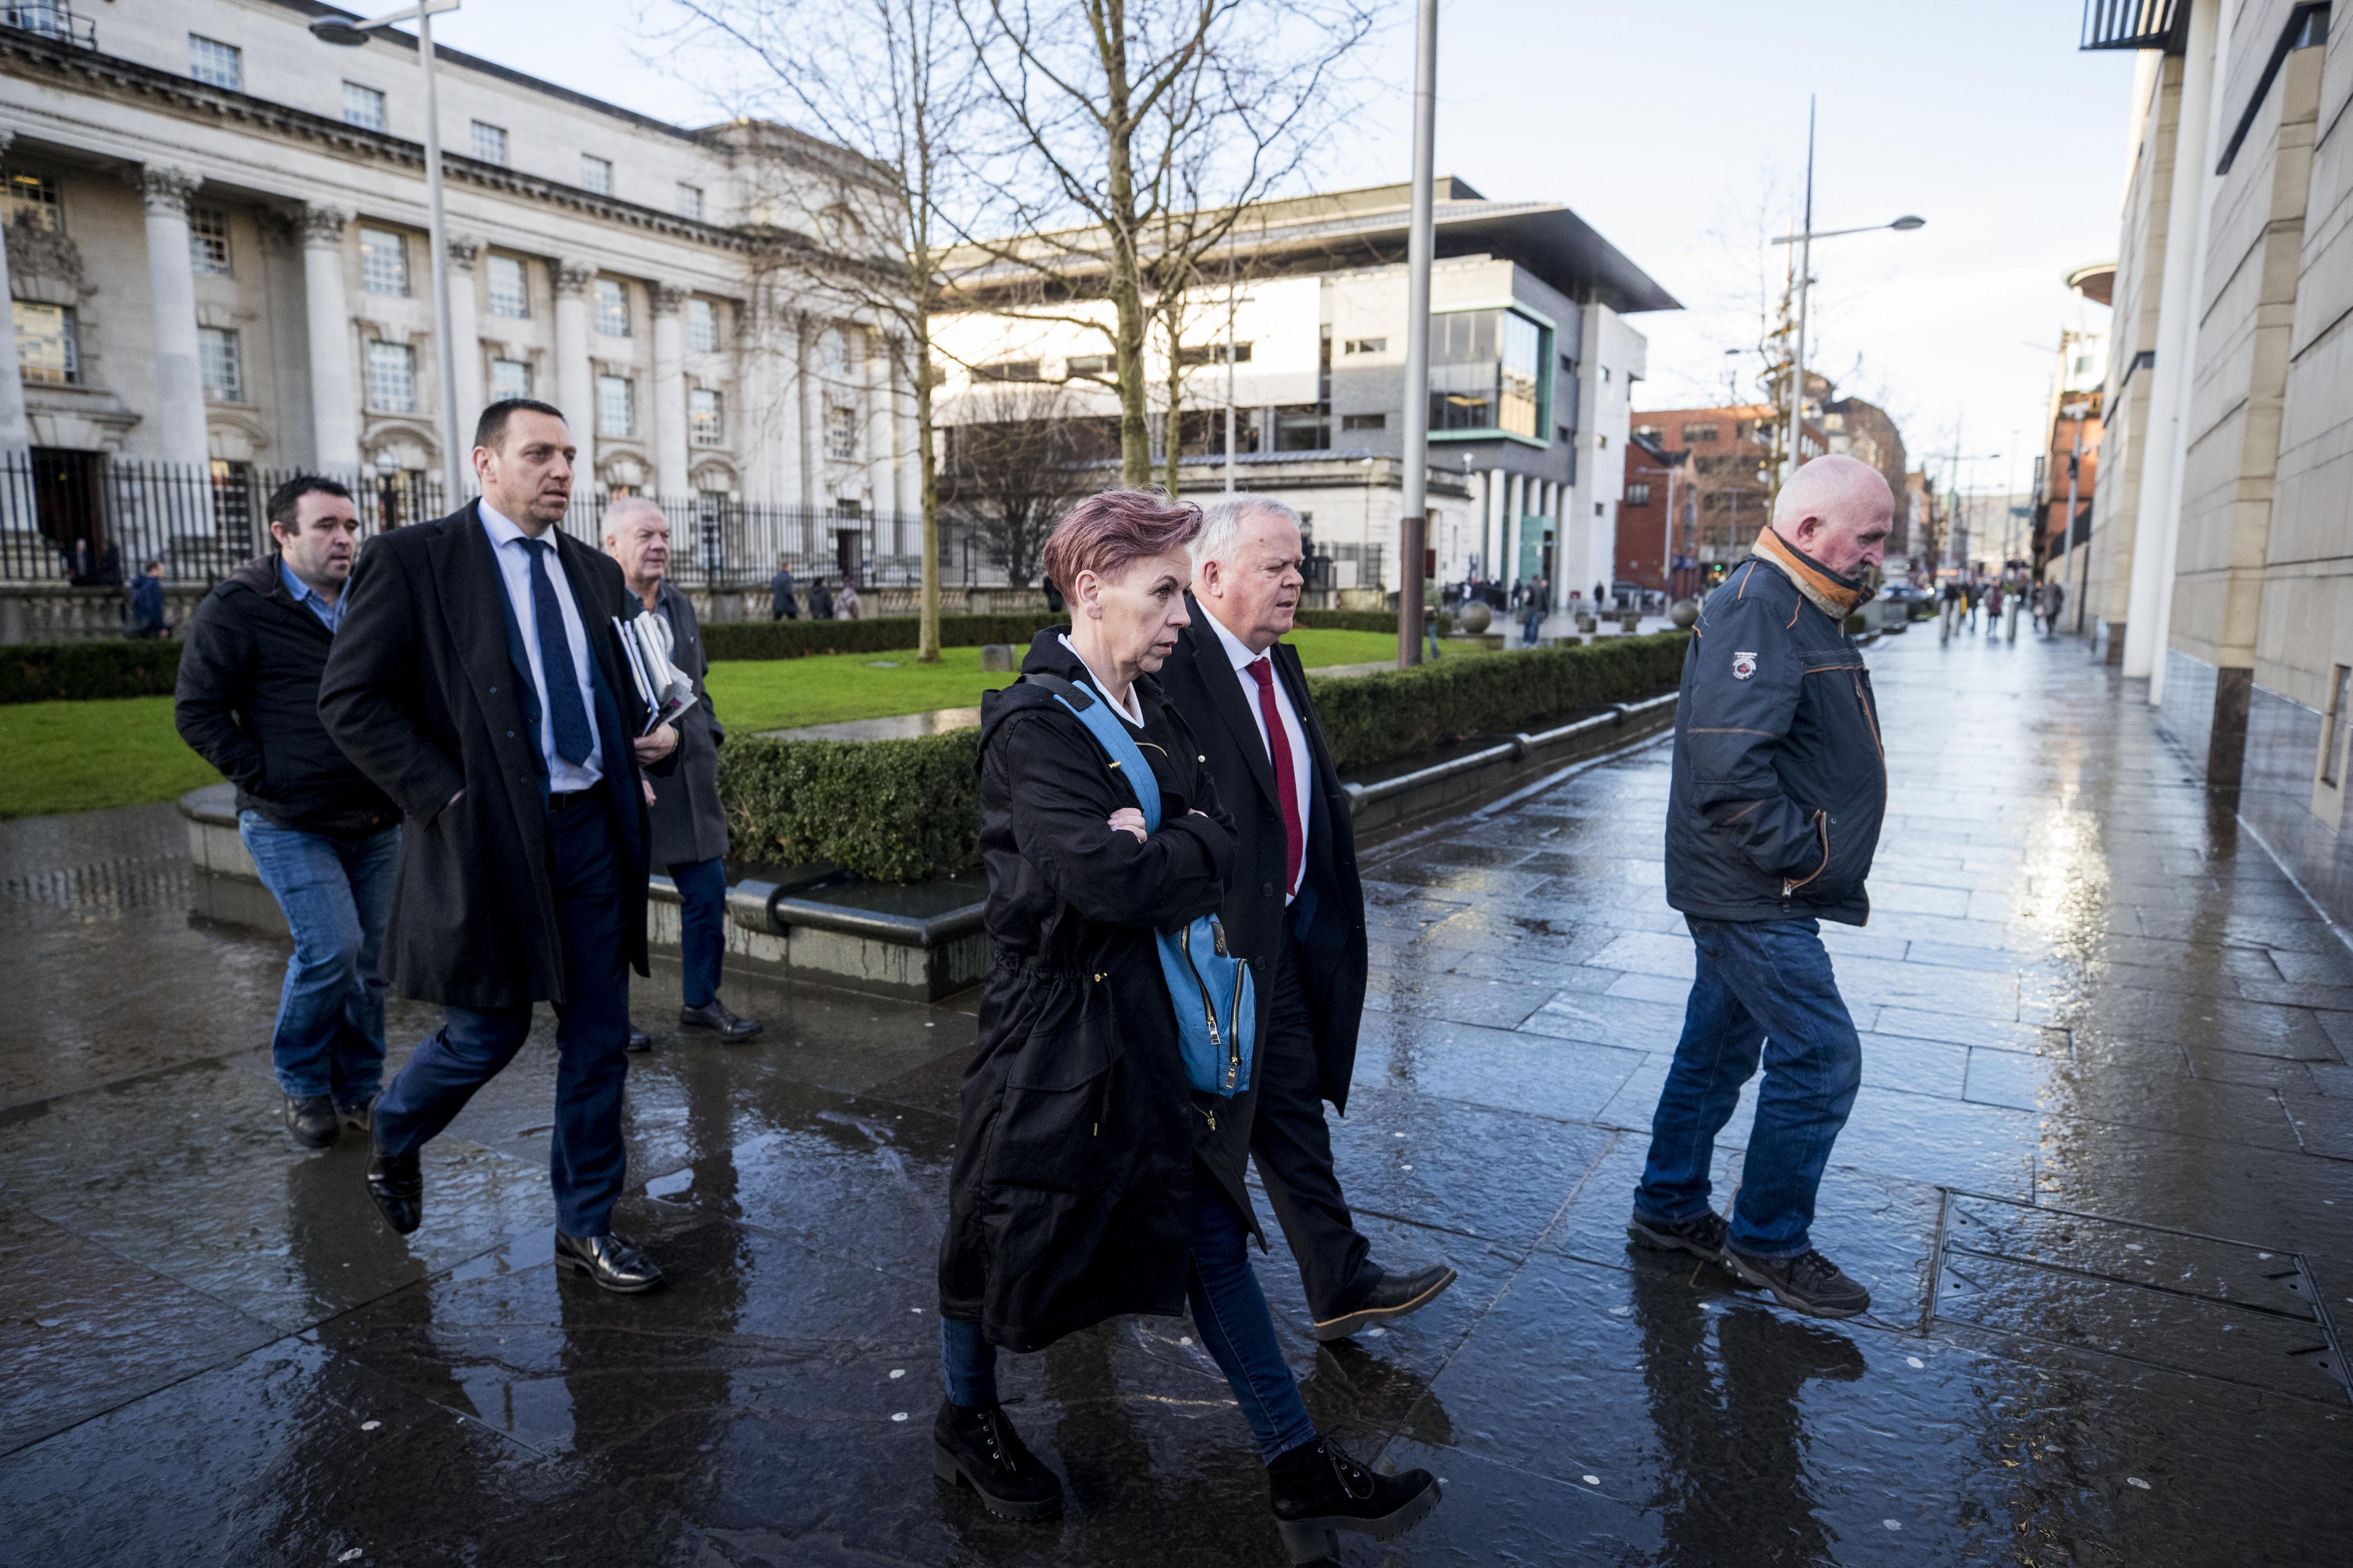 Keiran Fox (son of Eamon Fox, left), solicitor Padraig O'Muirigh (2nd left) Raymond McCord Snr (father of Raymond McCord Jnr 3rd left), SDLP MLA John Dallat (2nd right) and Joe Convie (father of Gary Convie, right) arriving at Laganside courts in Belfas